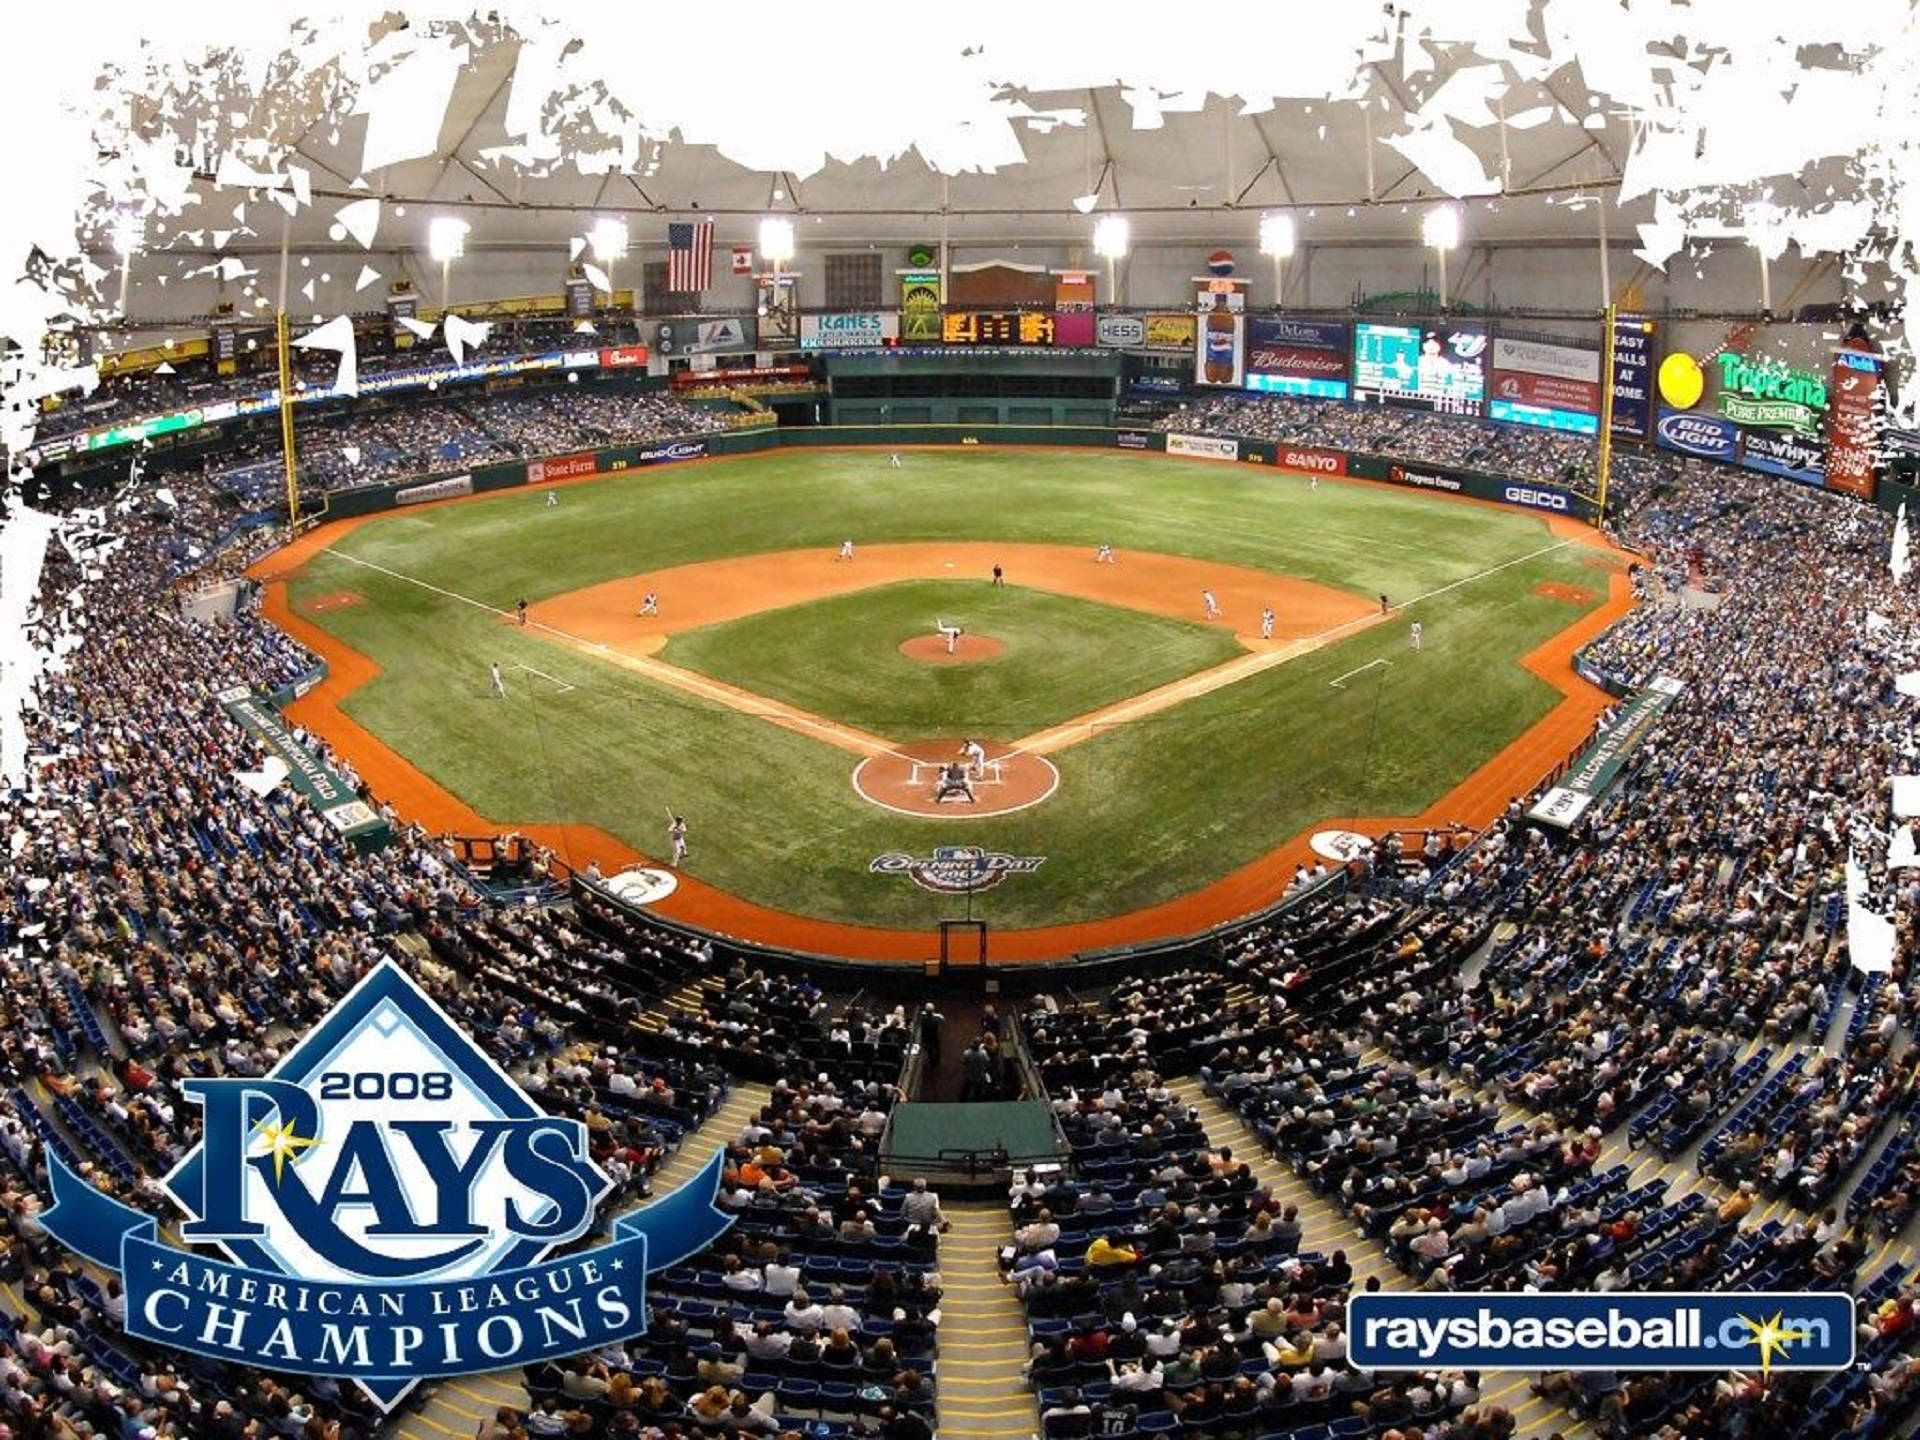 Tampa Bay Rays League Champion Poster